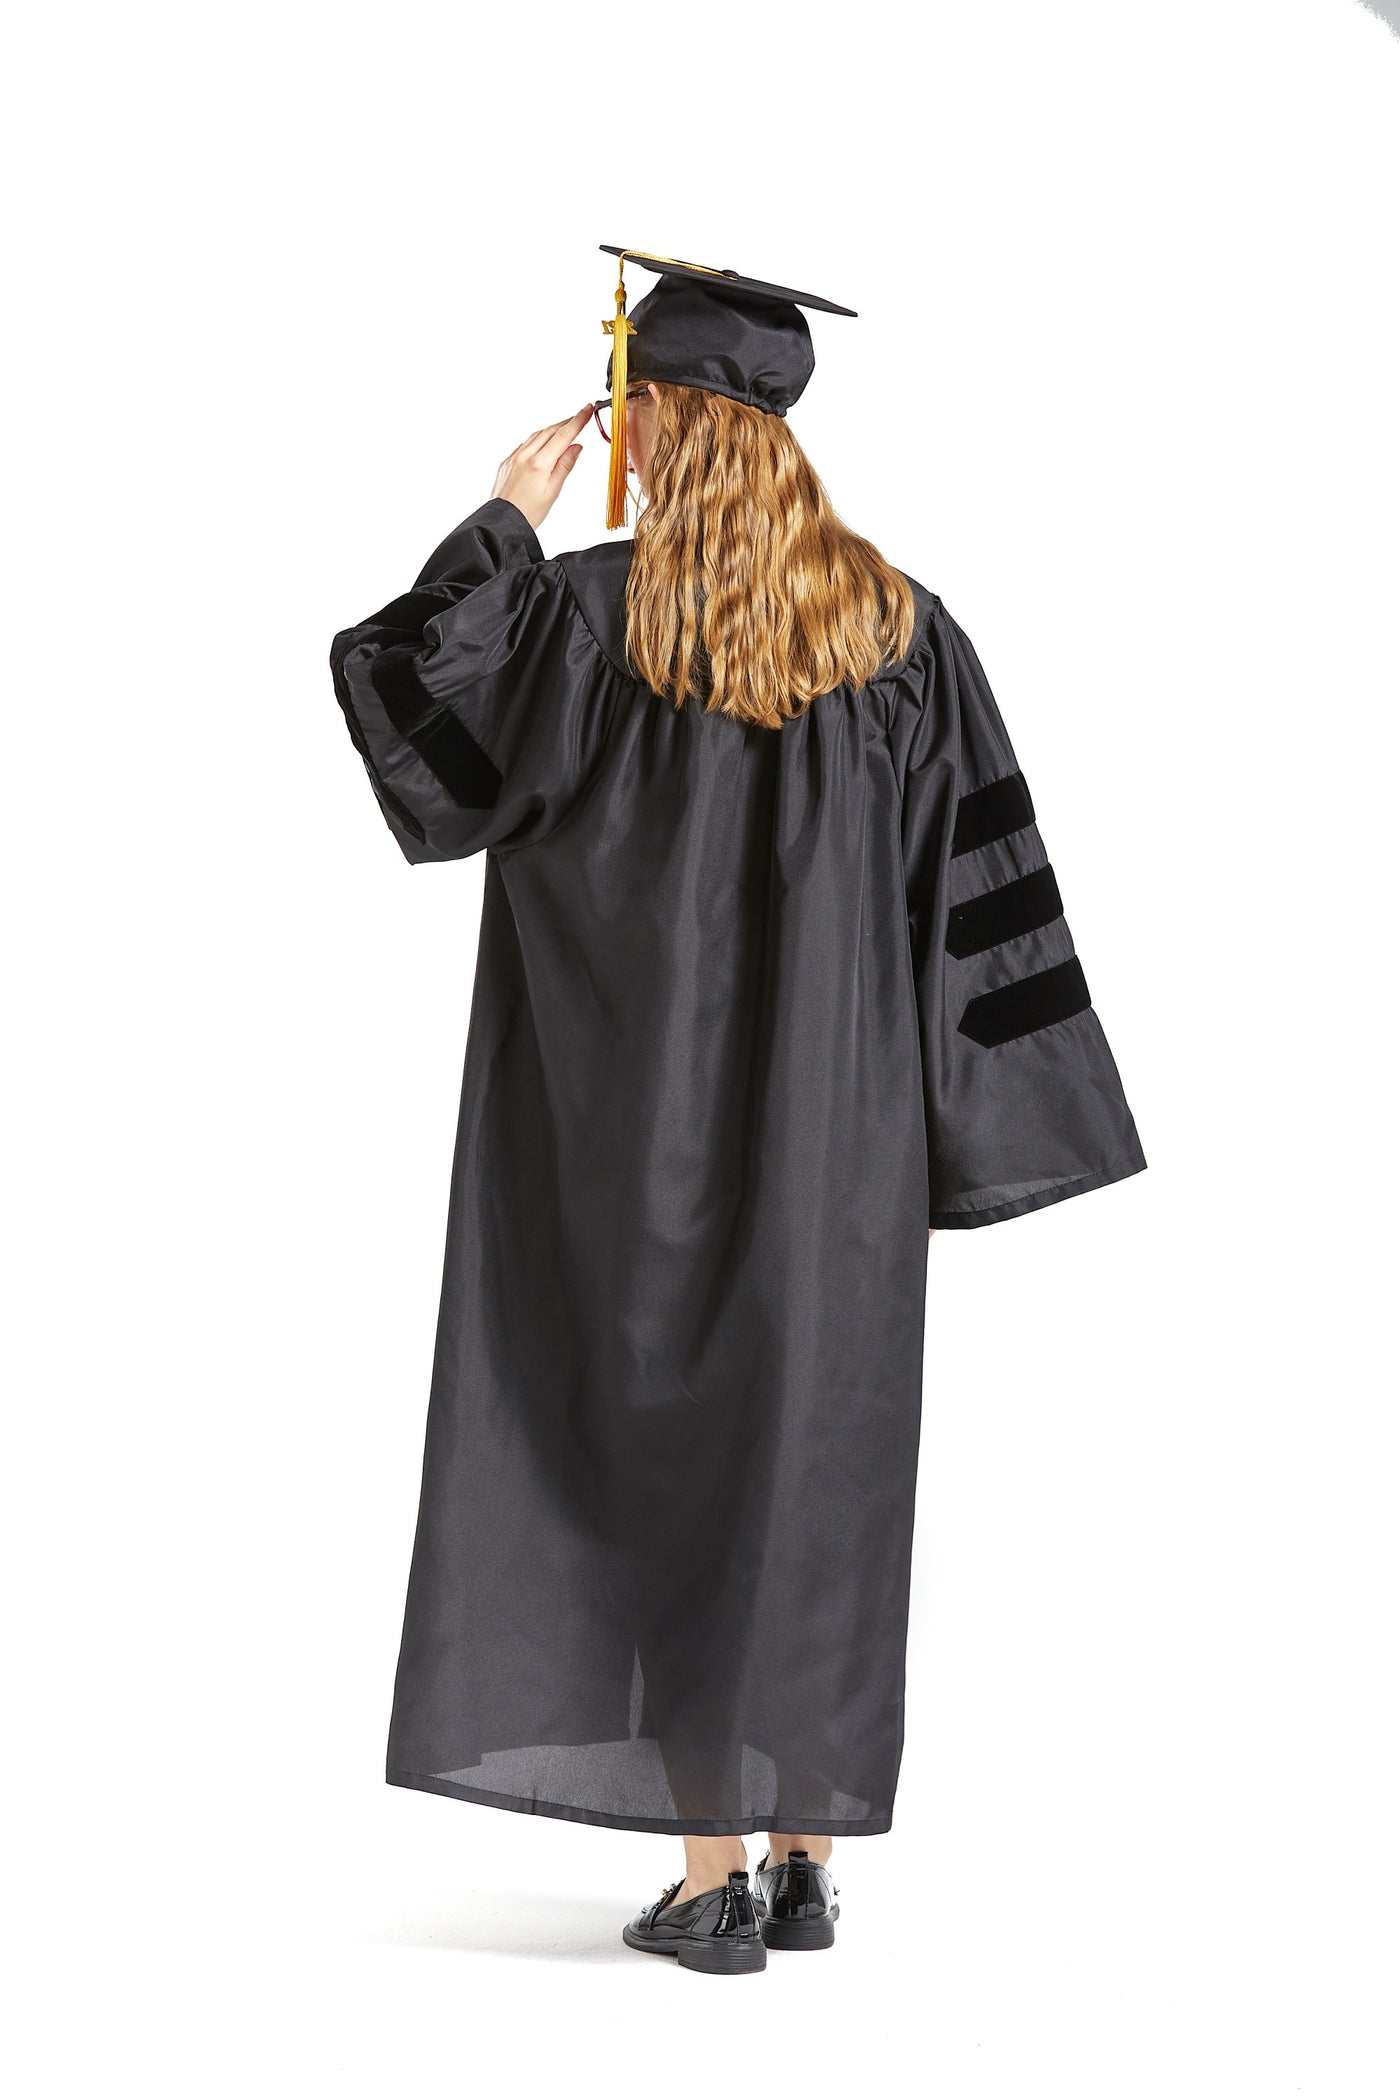 2023&2022 Doctoral Cap and Gown for PhD Graduates and Faculty